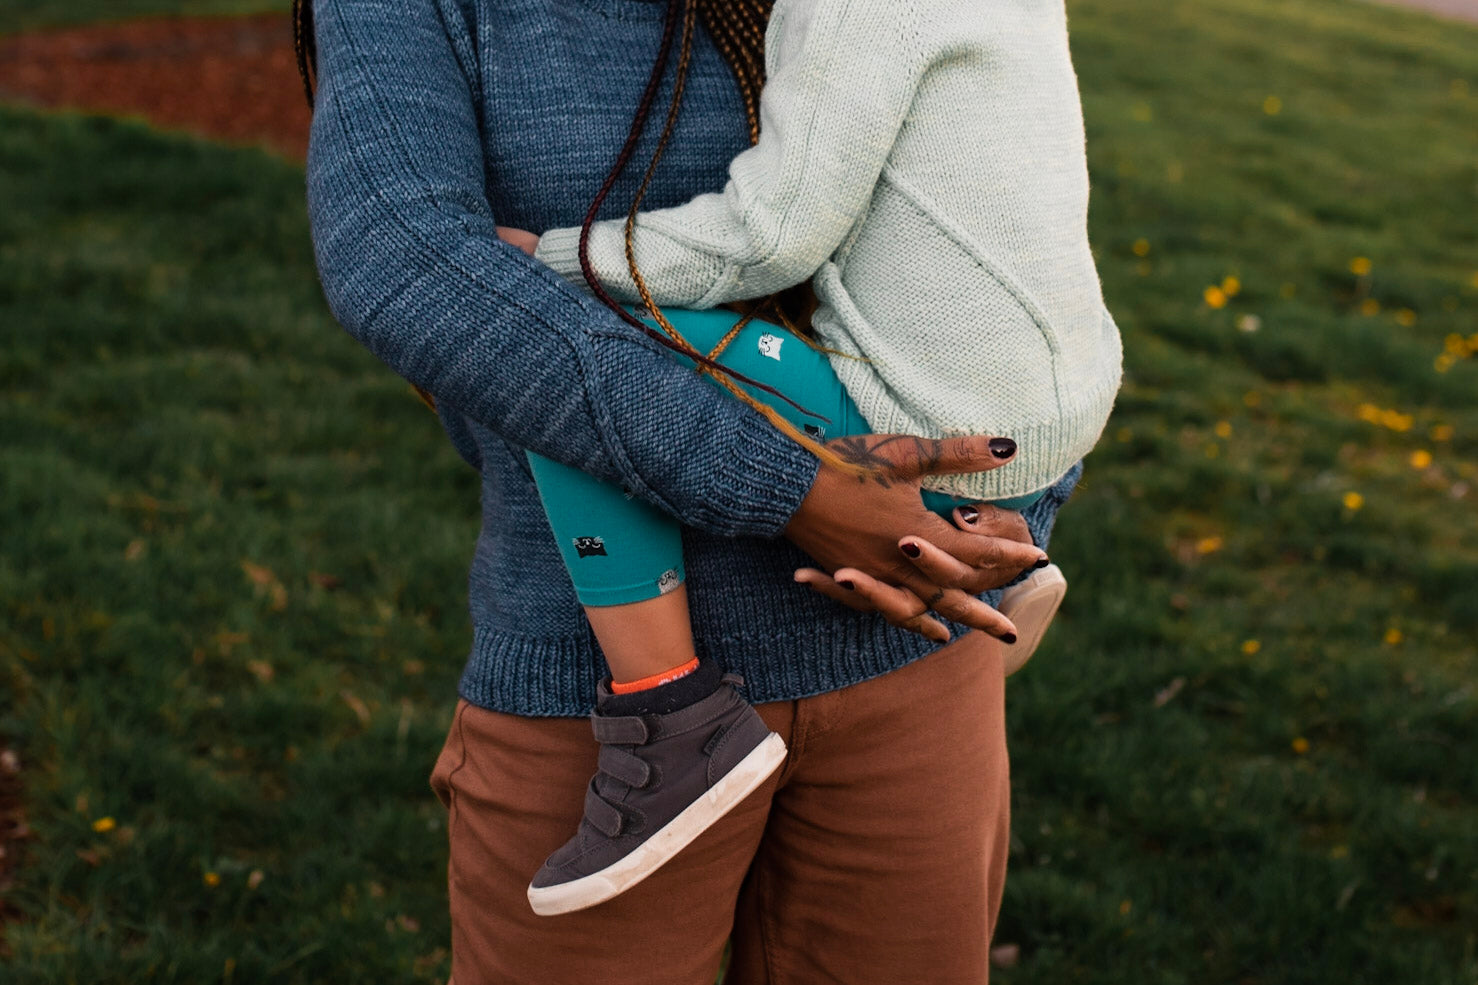 Rachel holds Mia in her arms, the camera focusing on the cable design around the cuffs of her navy blue, hand knit sweater.